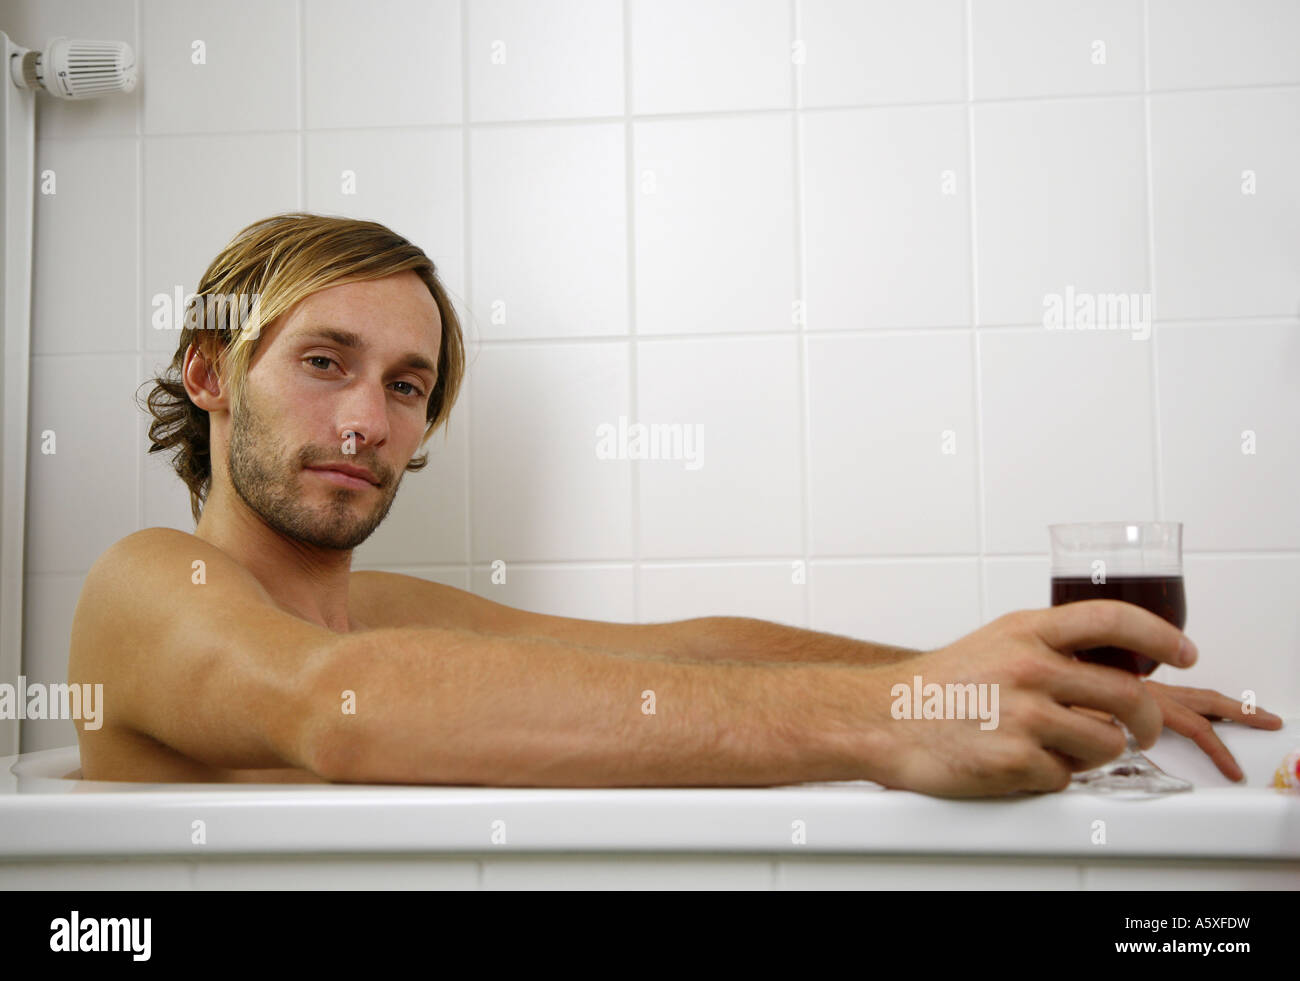 Young man leaning in bath tub holding wine glass close up Stock Photo